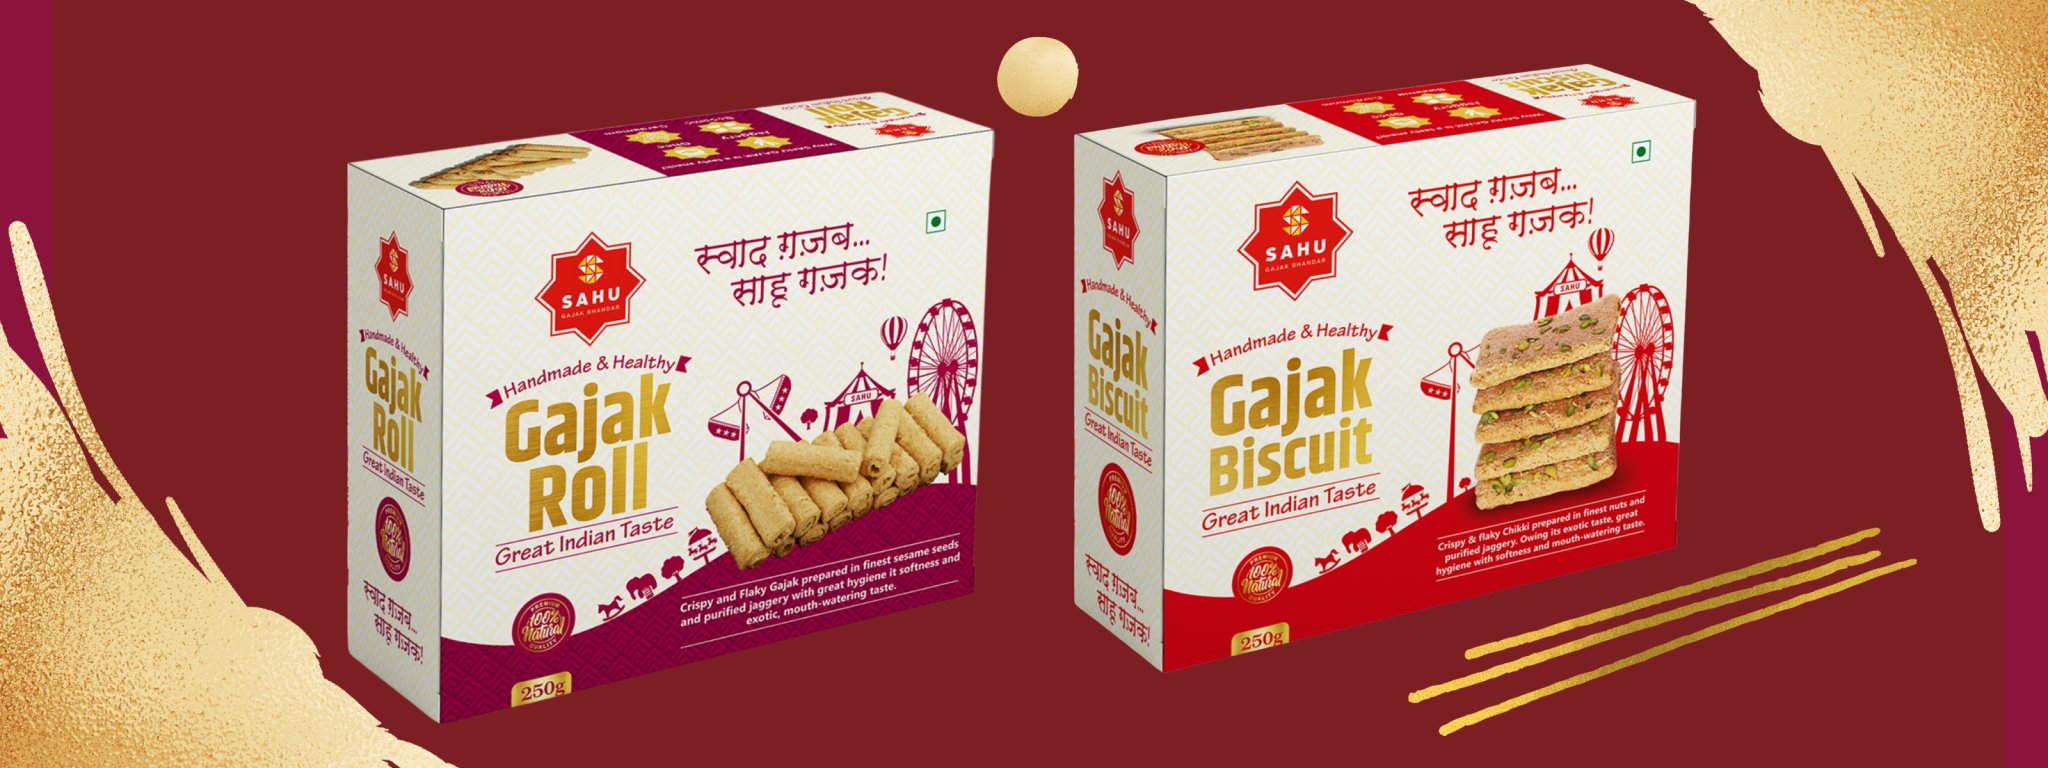 A vibrant display of Sahu Roll Gajak and Gajak Biscuits, showcasing their unique textures and golden hues